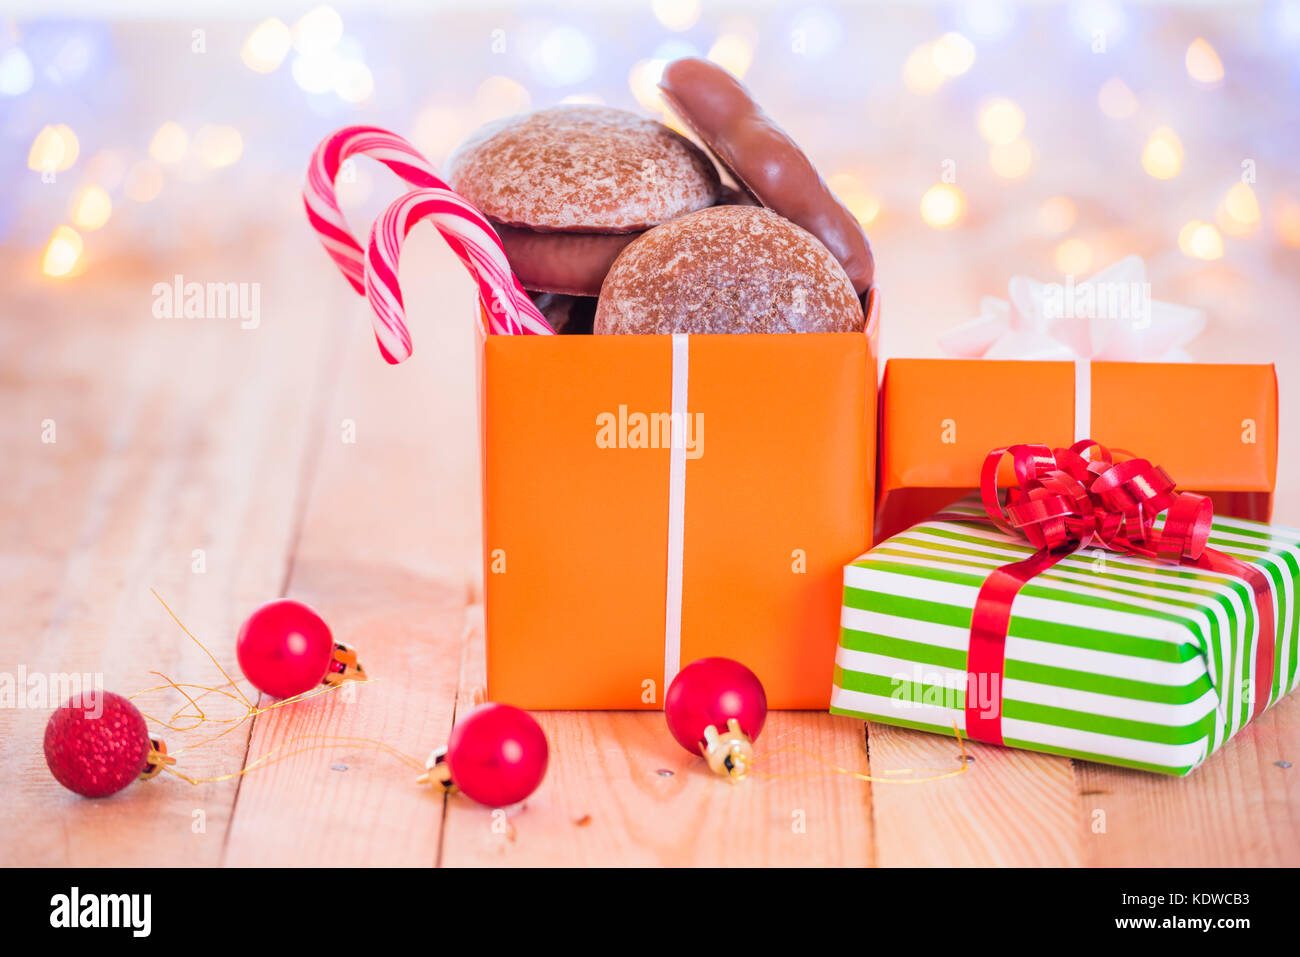 Presents with gingerbread and candies inside, on a wooden table, surrounded by red globes and blurred Xmas lights in the background. Stock Photo